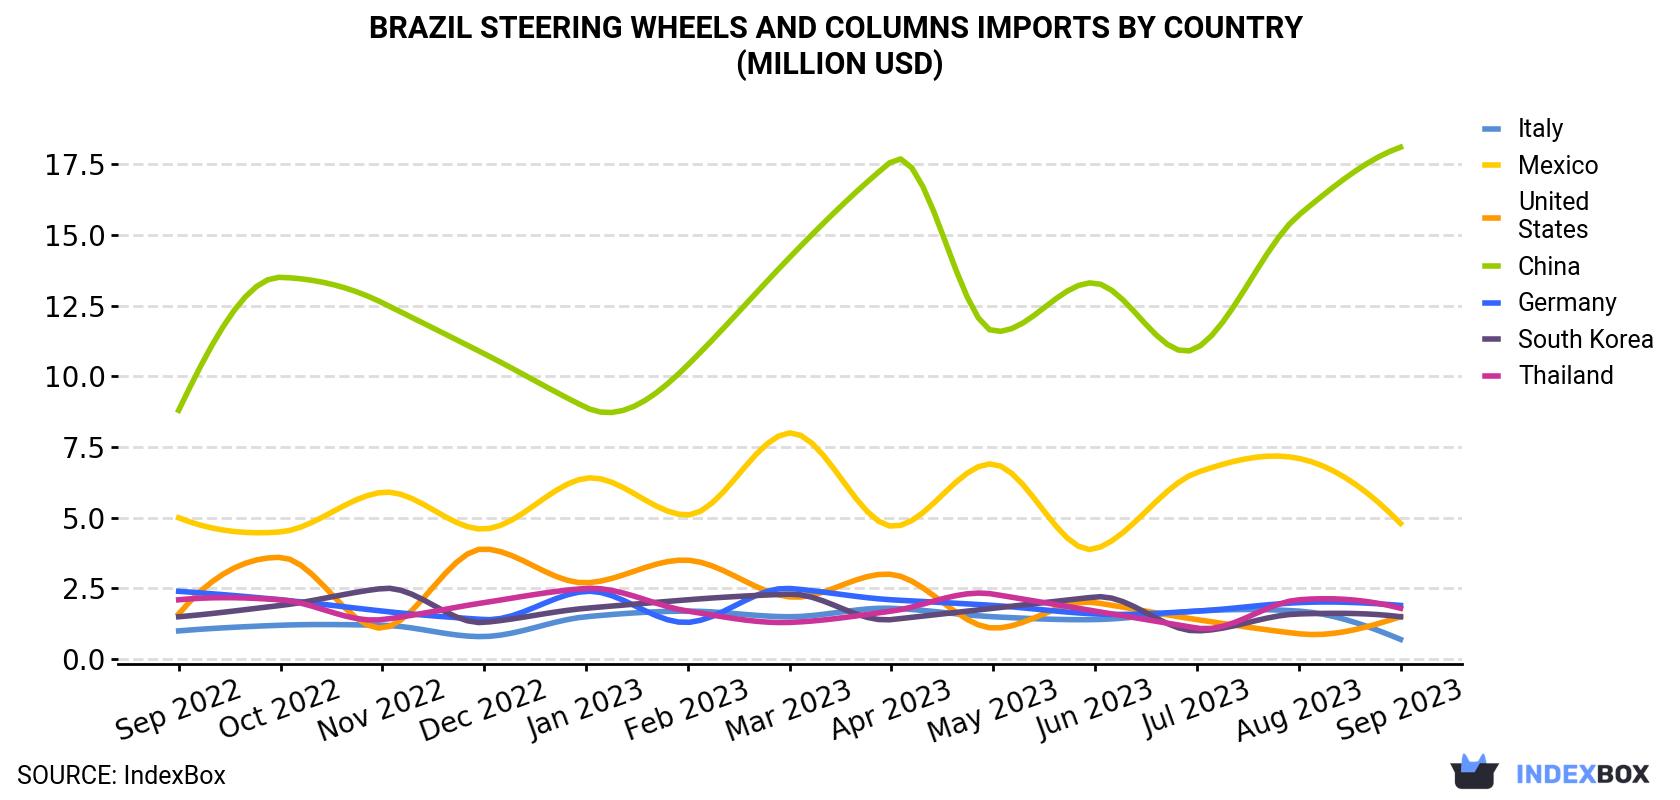 Brazil Steering Wheels And Columns Imports By Country (Million USD)